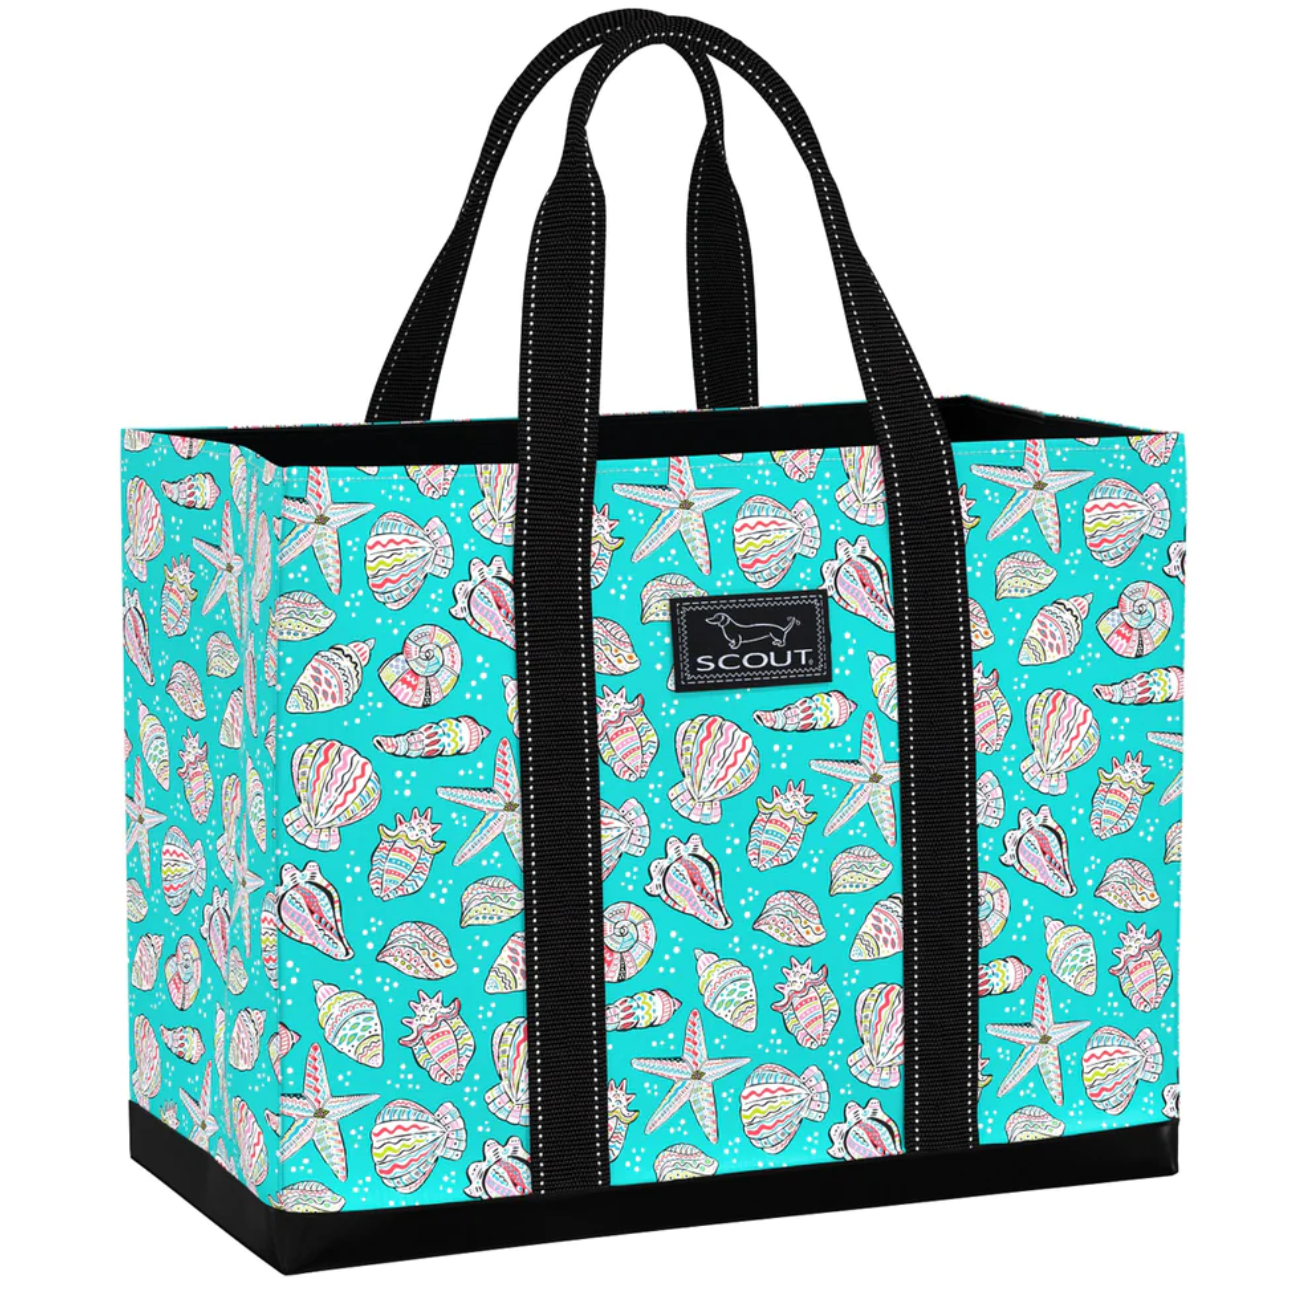 Scout Original Deano Tote Luggage, Totes in Mademoishell at Wrapsody